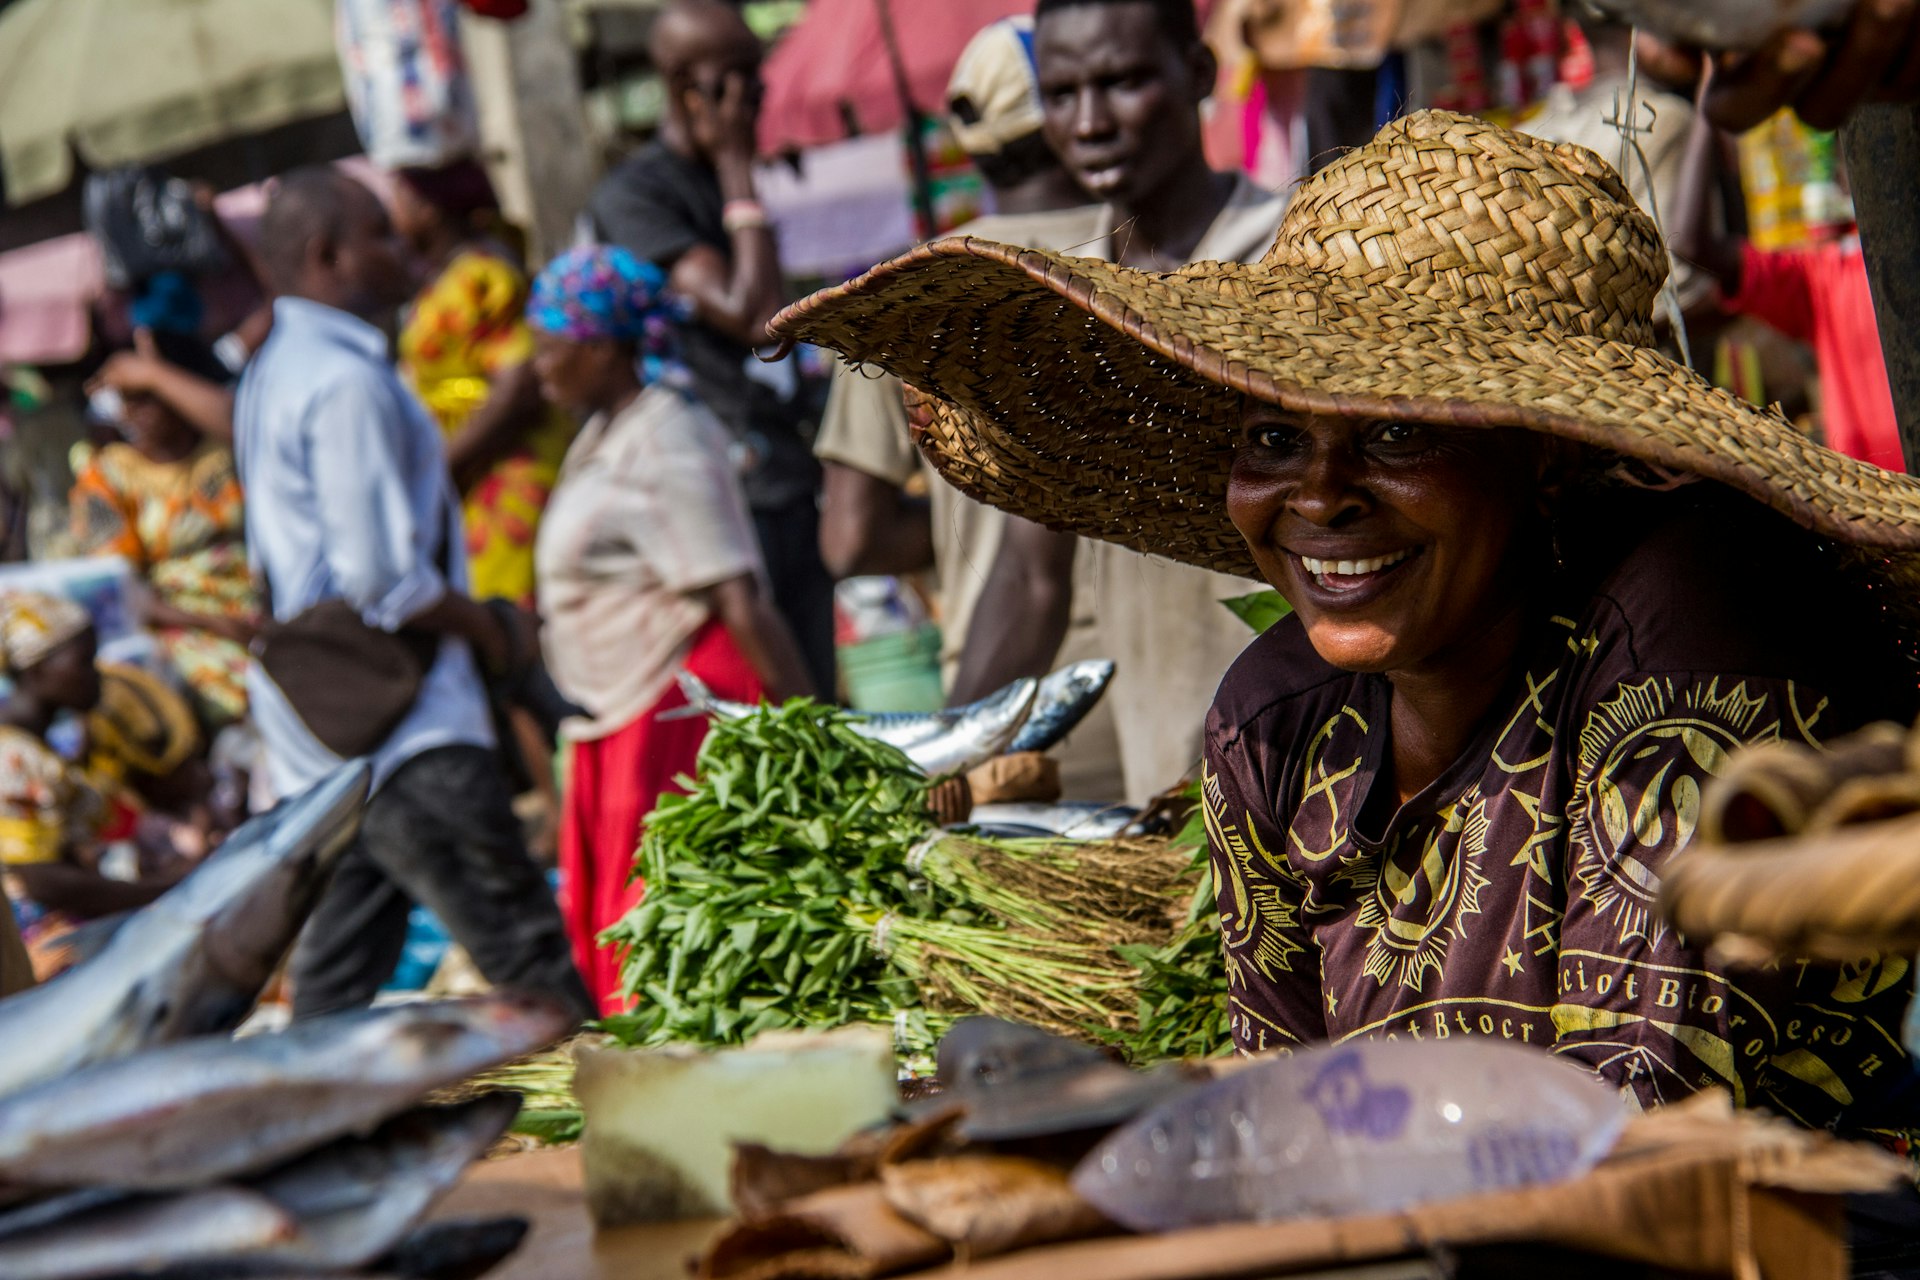 A vegetable vendor wearing a straw hat smiles at bustling Mile 12 Market in Lagos, Nigeria